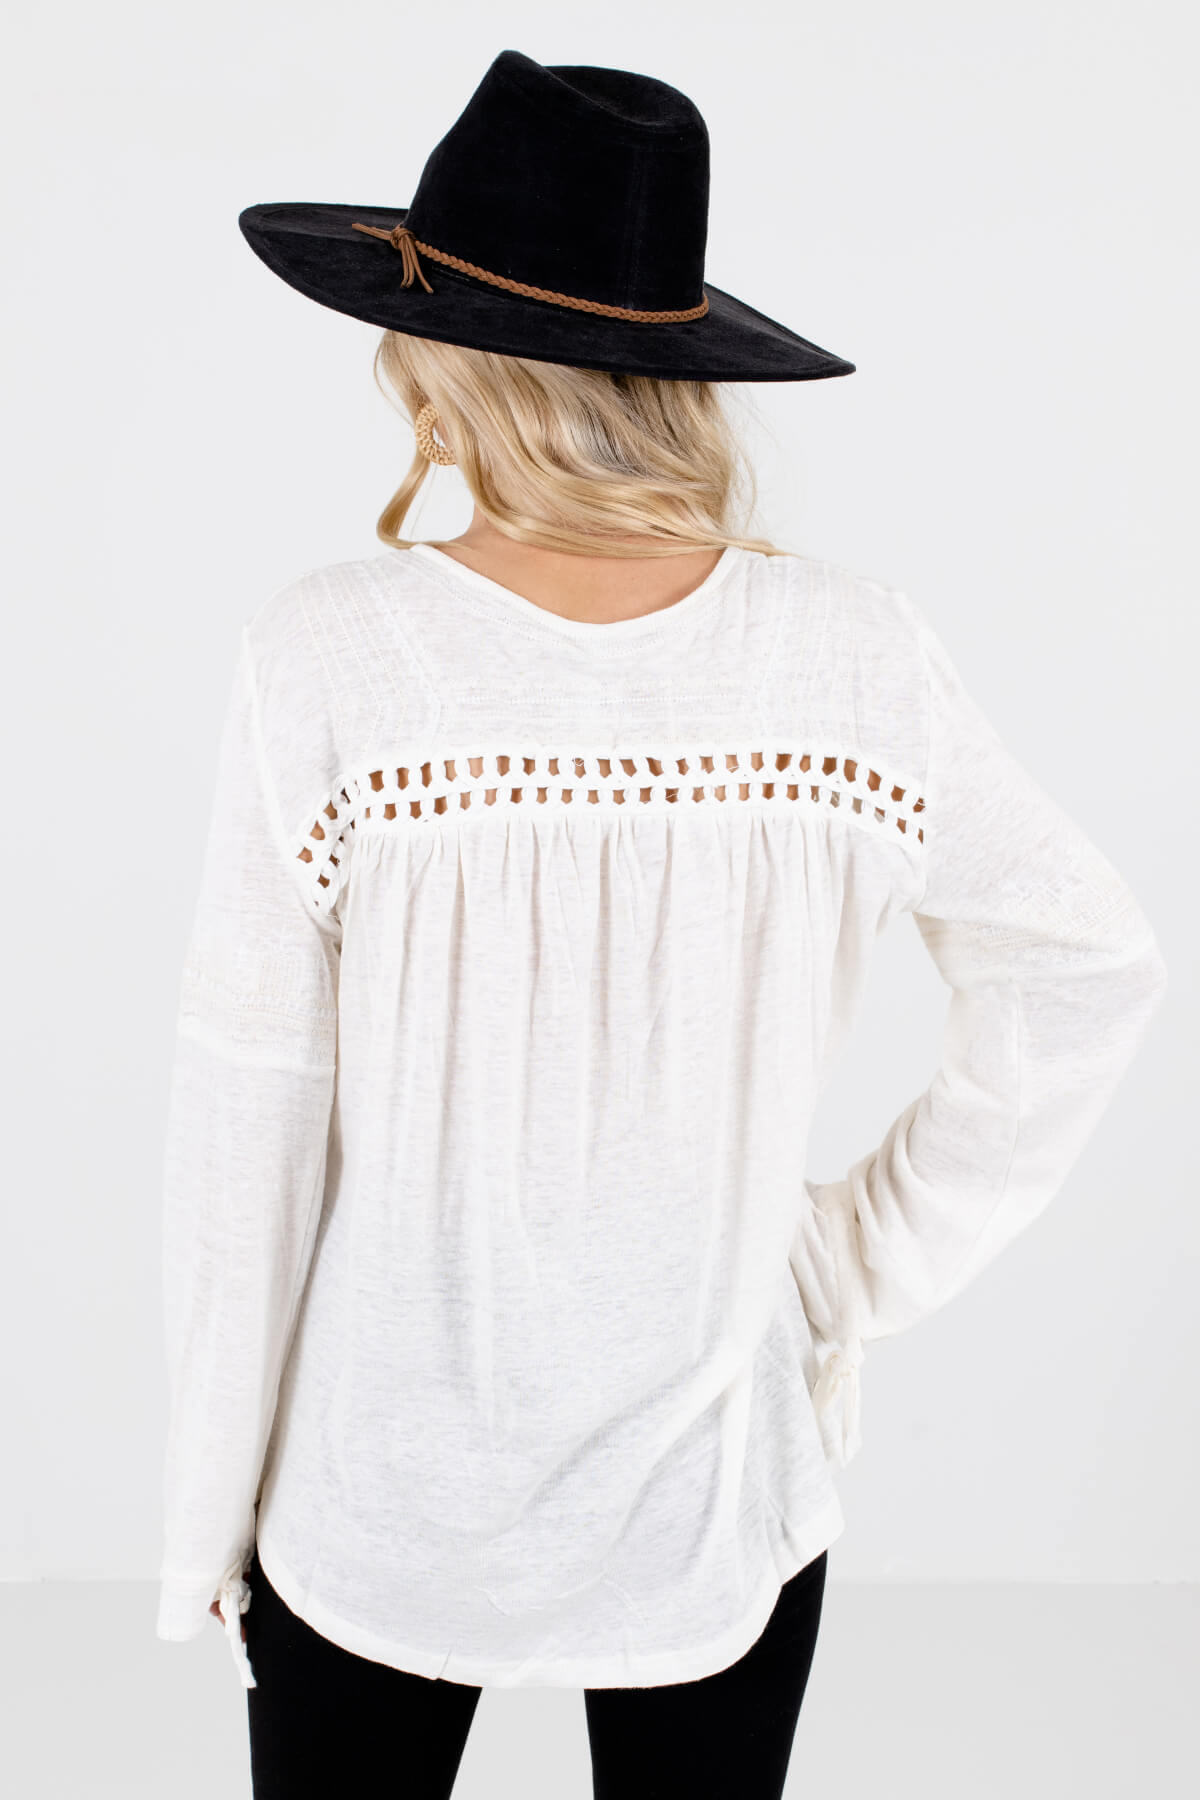 Women's Cream Embroidered Accented Boutique Tops